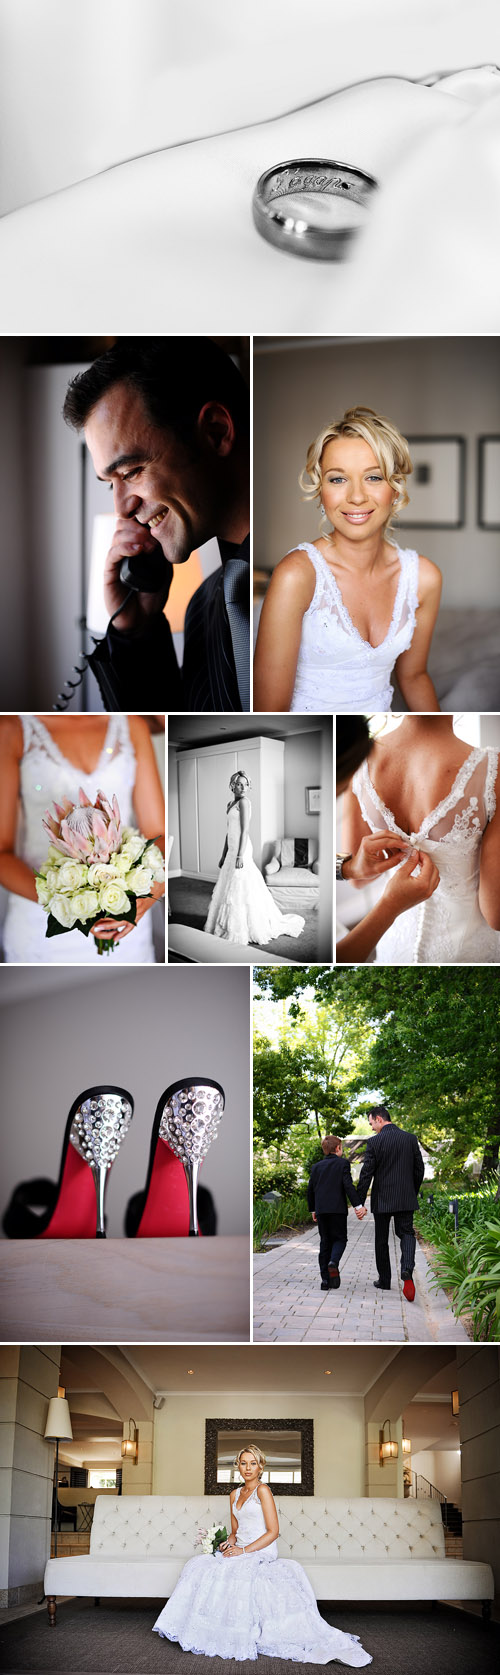 glamorous south african real wedding, black, white, gray and silver wedding color palette, images by Eric Uys